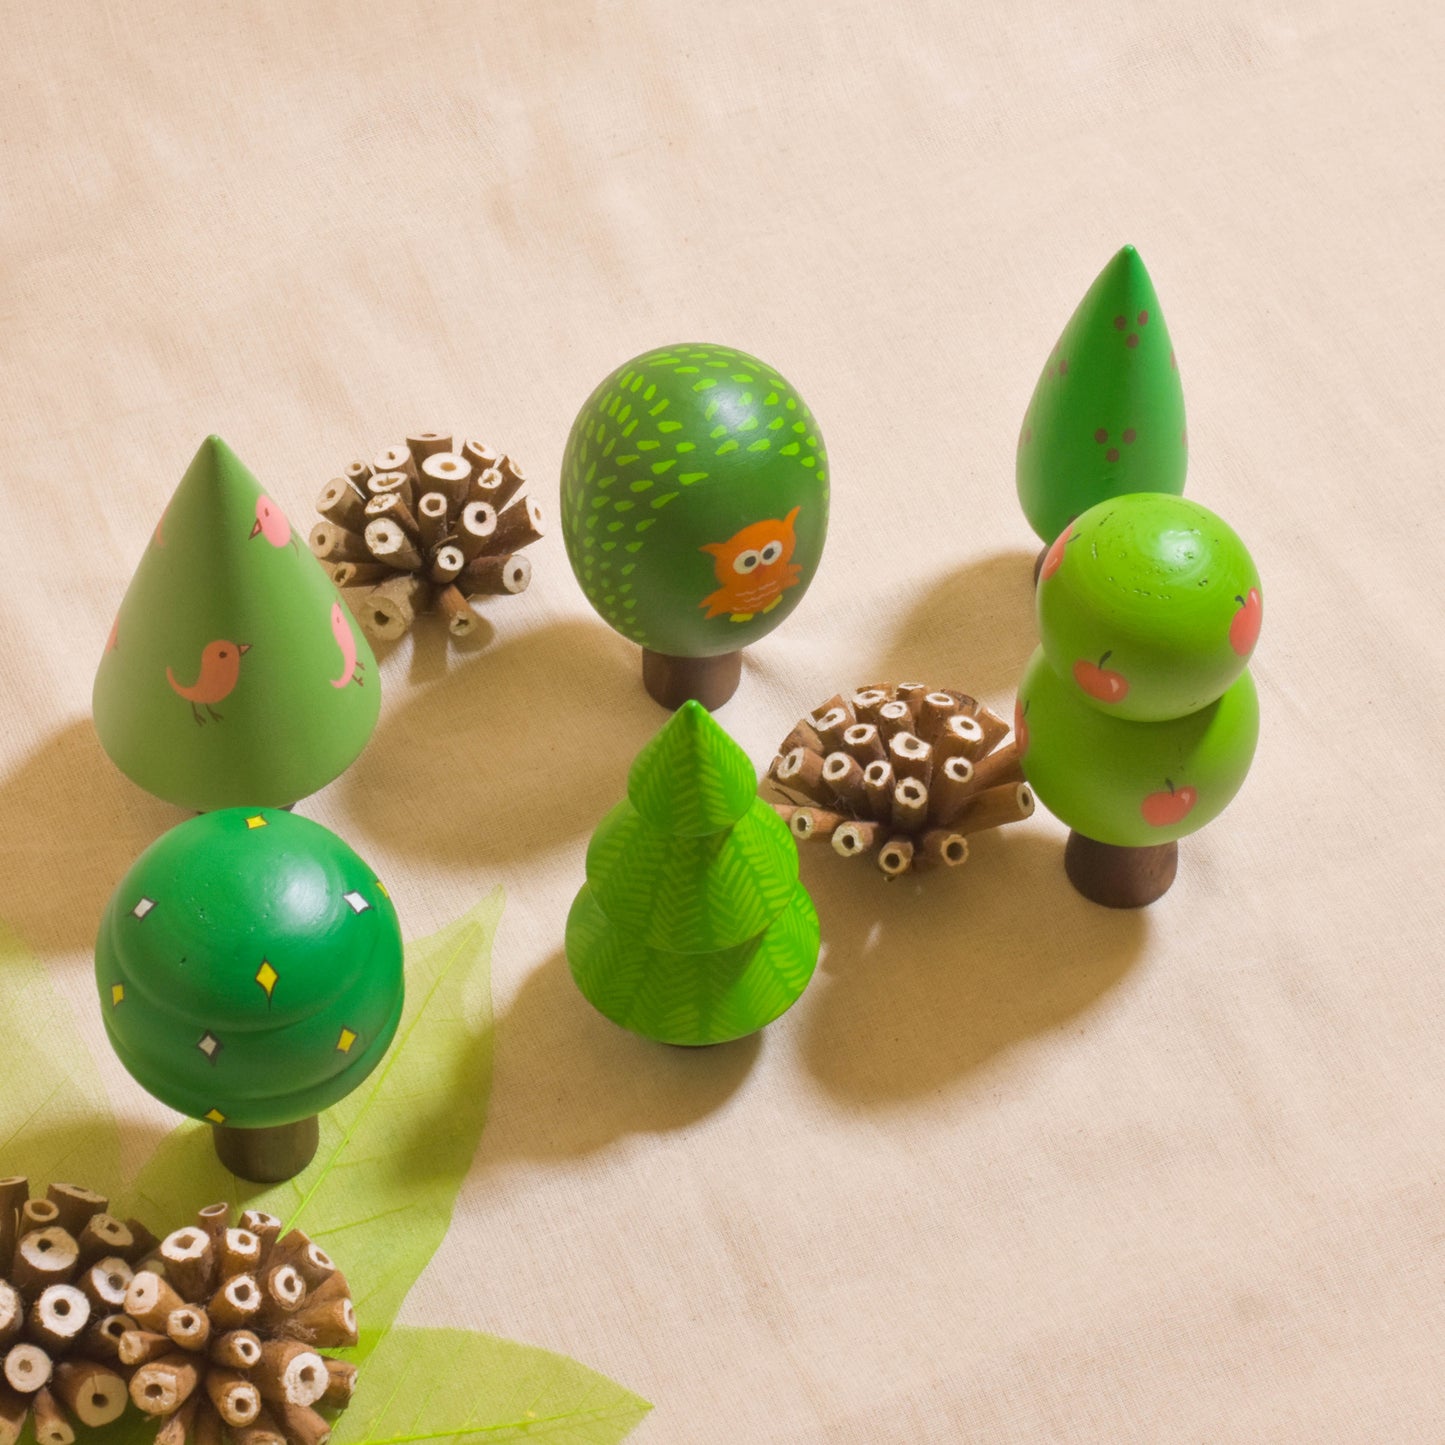 Forest Tree Set | Set of six | Christmas Table Décor | Natural Wood | BPA free | Handmade | Kids Toy | Holiday Decor